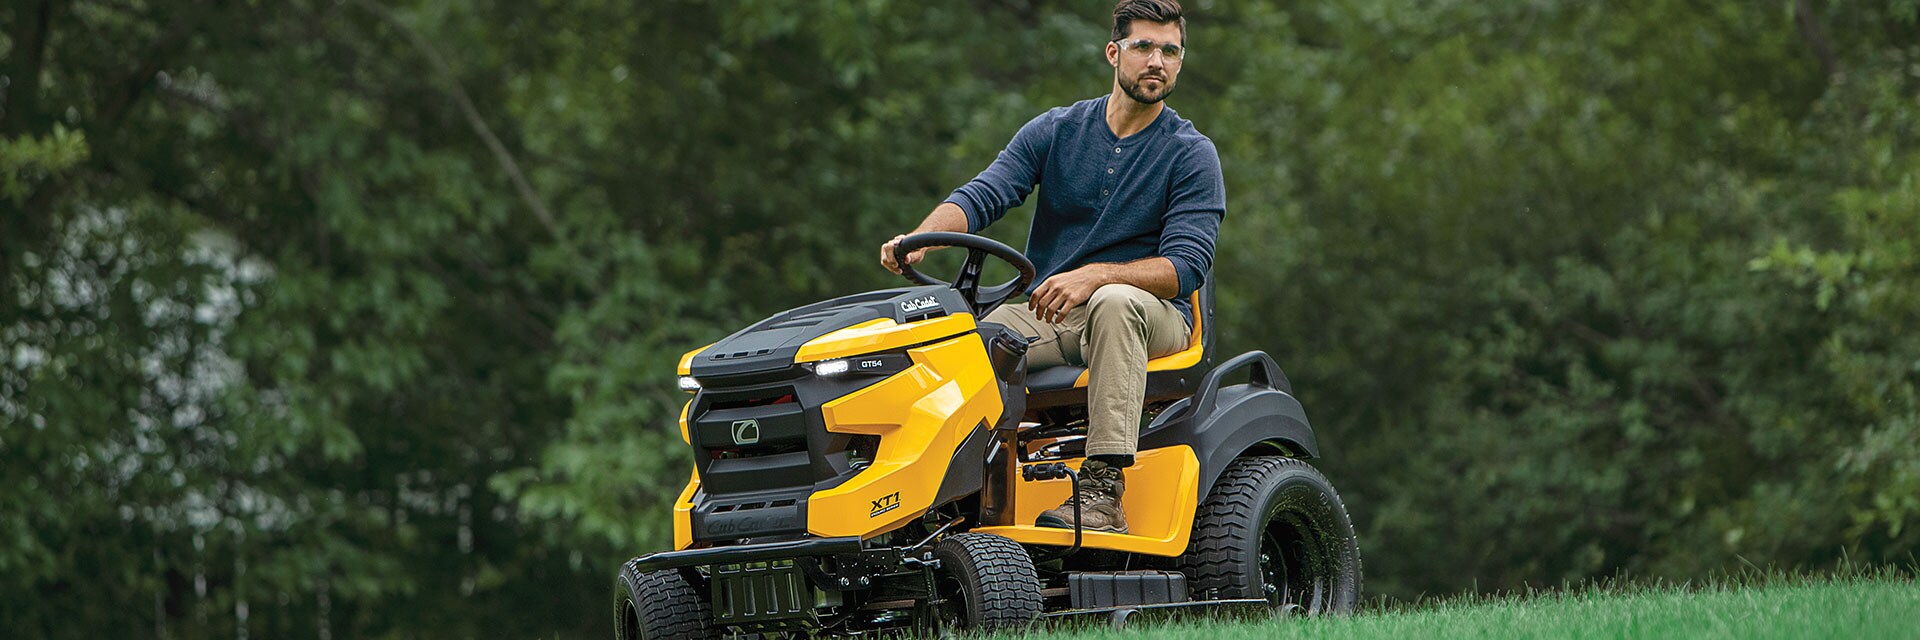 User on a riding mower outdoors